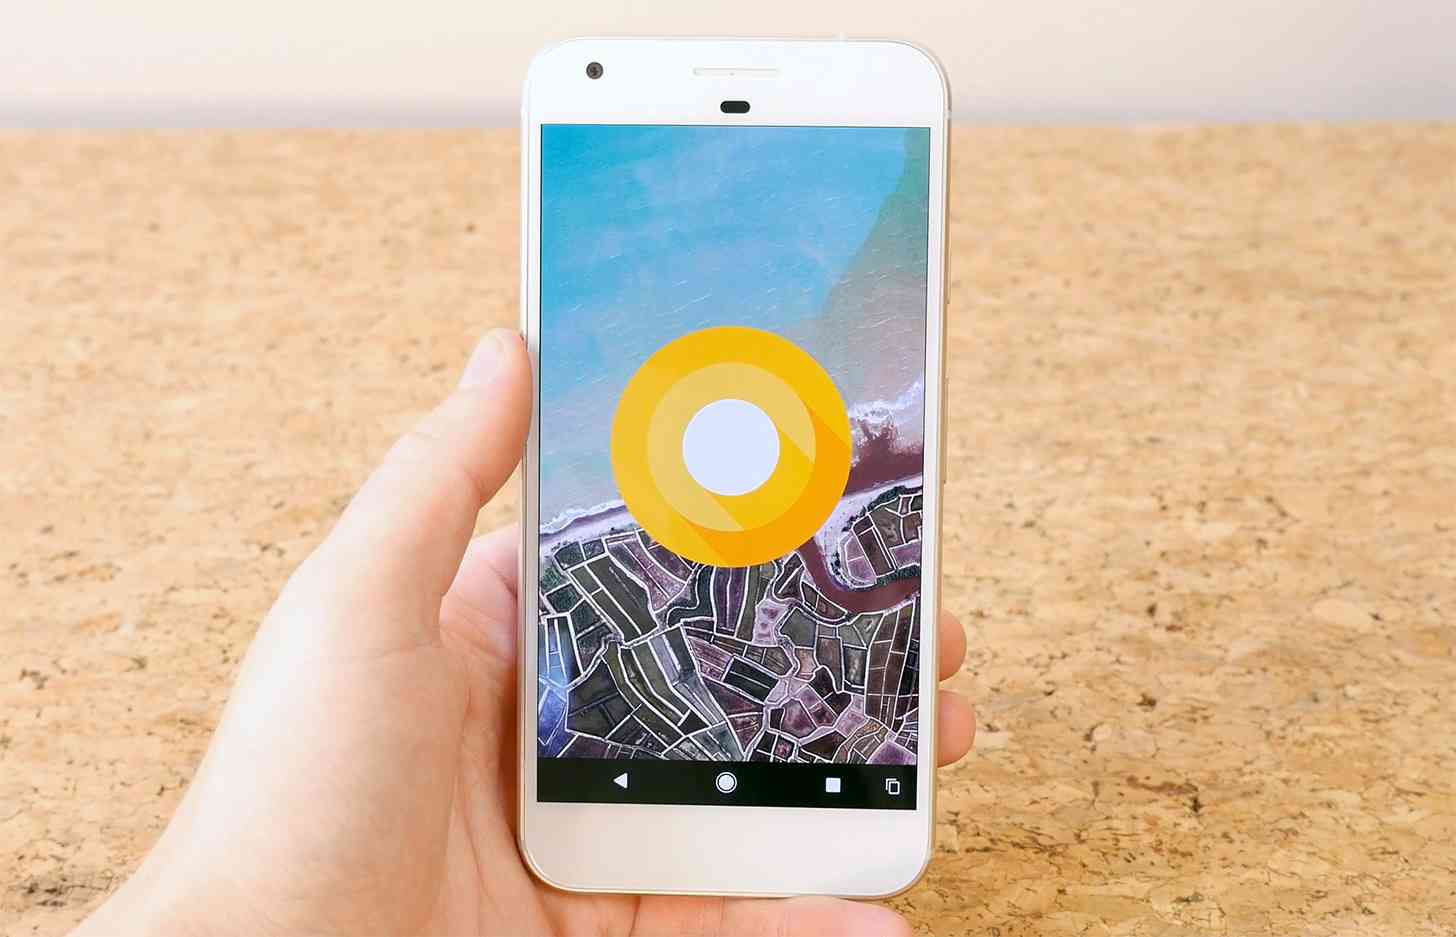 Android 8.0 Oreo Google Pixel XL hands-on